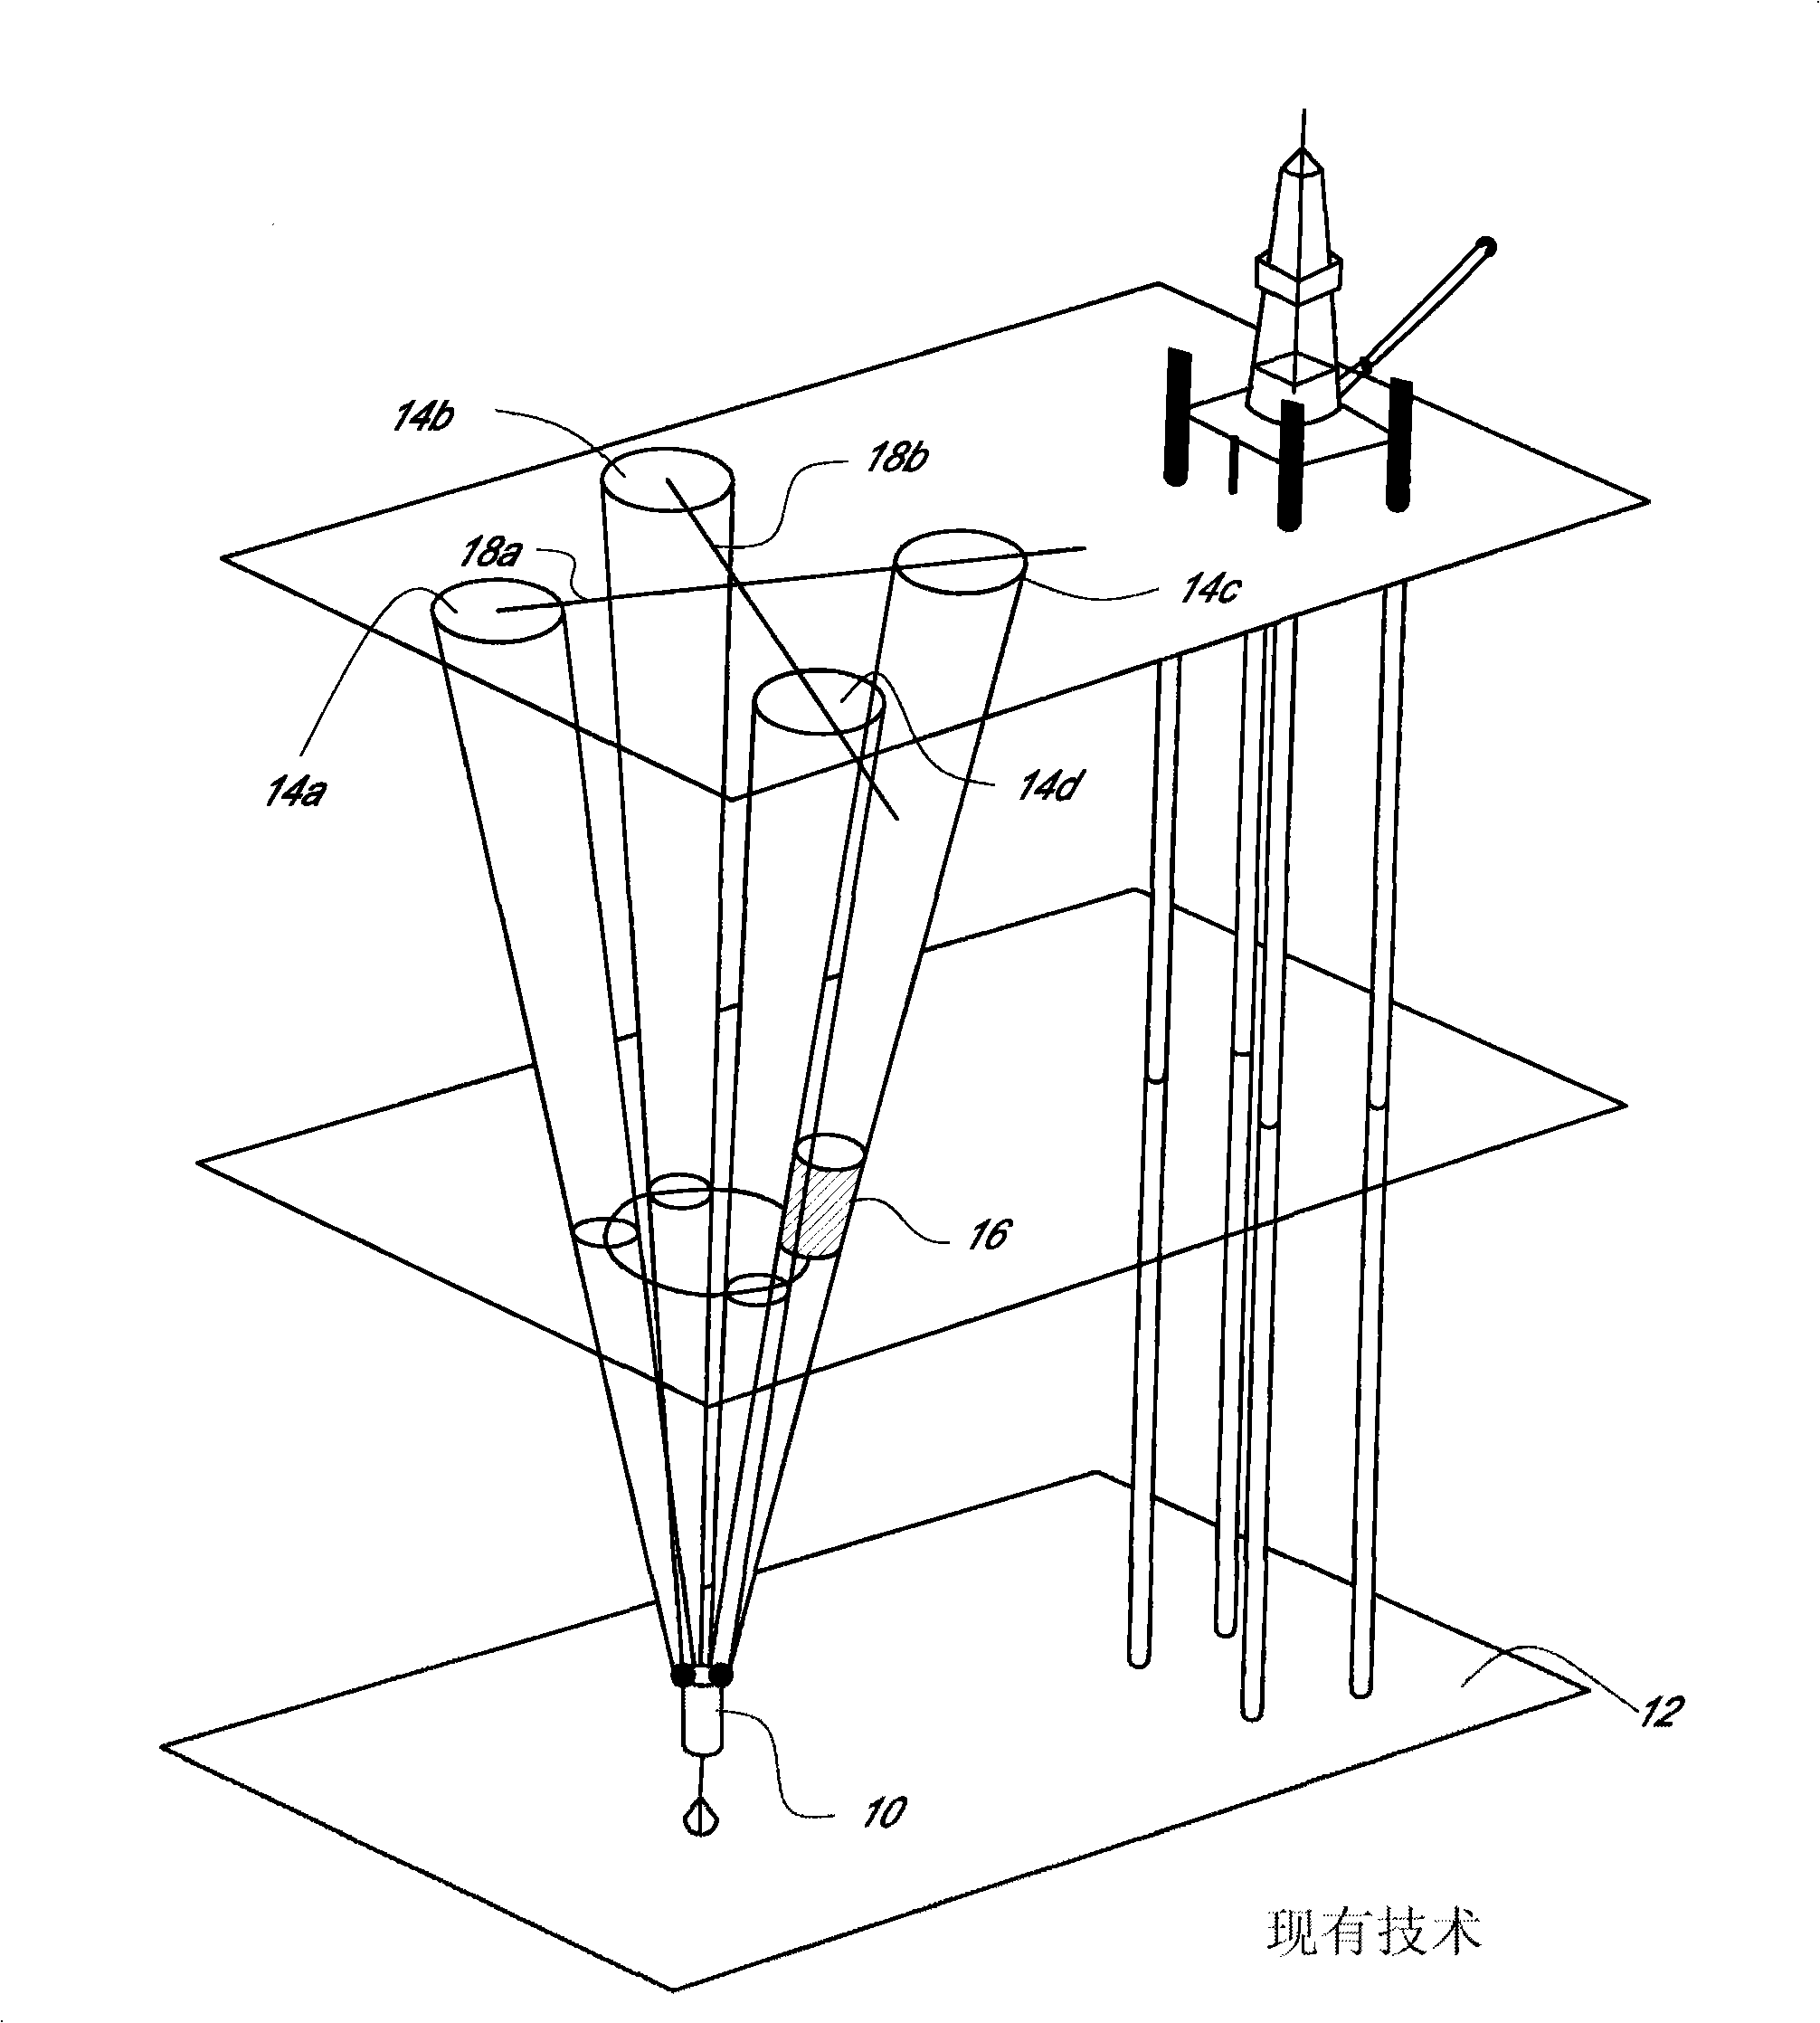 System and method for acoustic doppler velocity processing with a phased array transducer